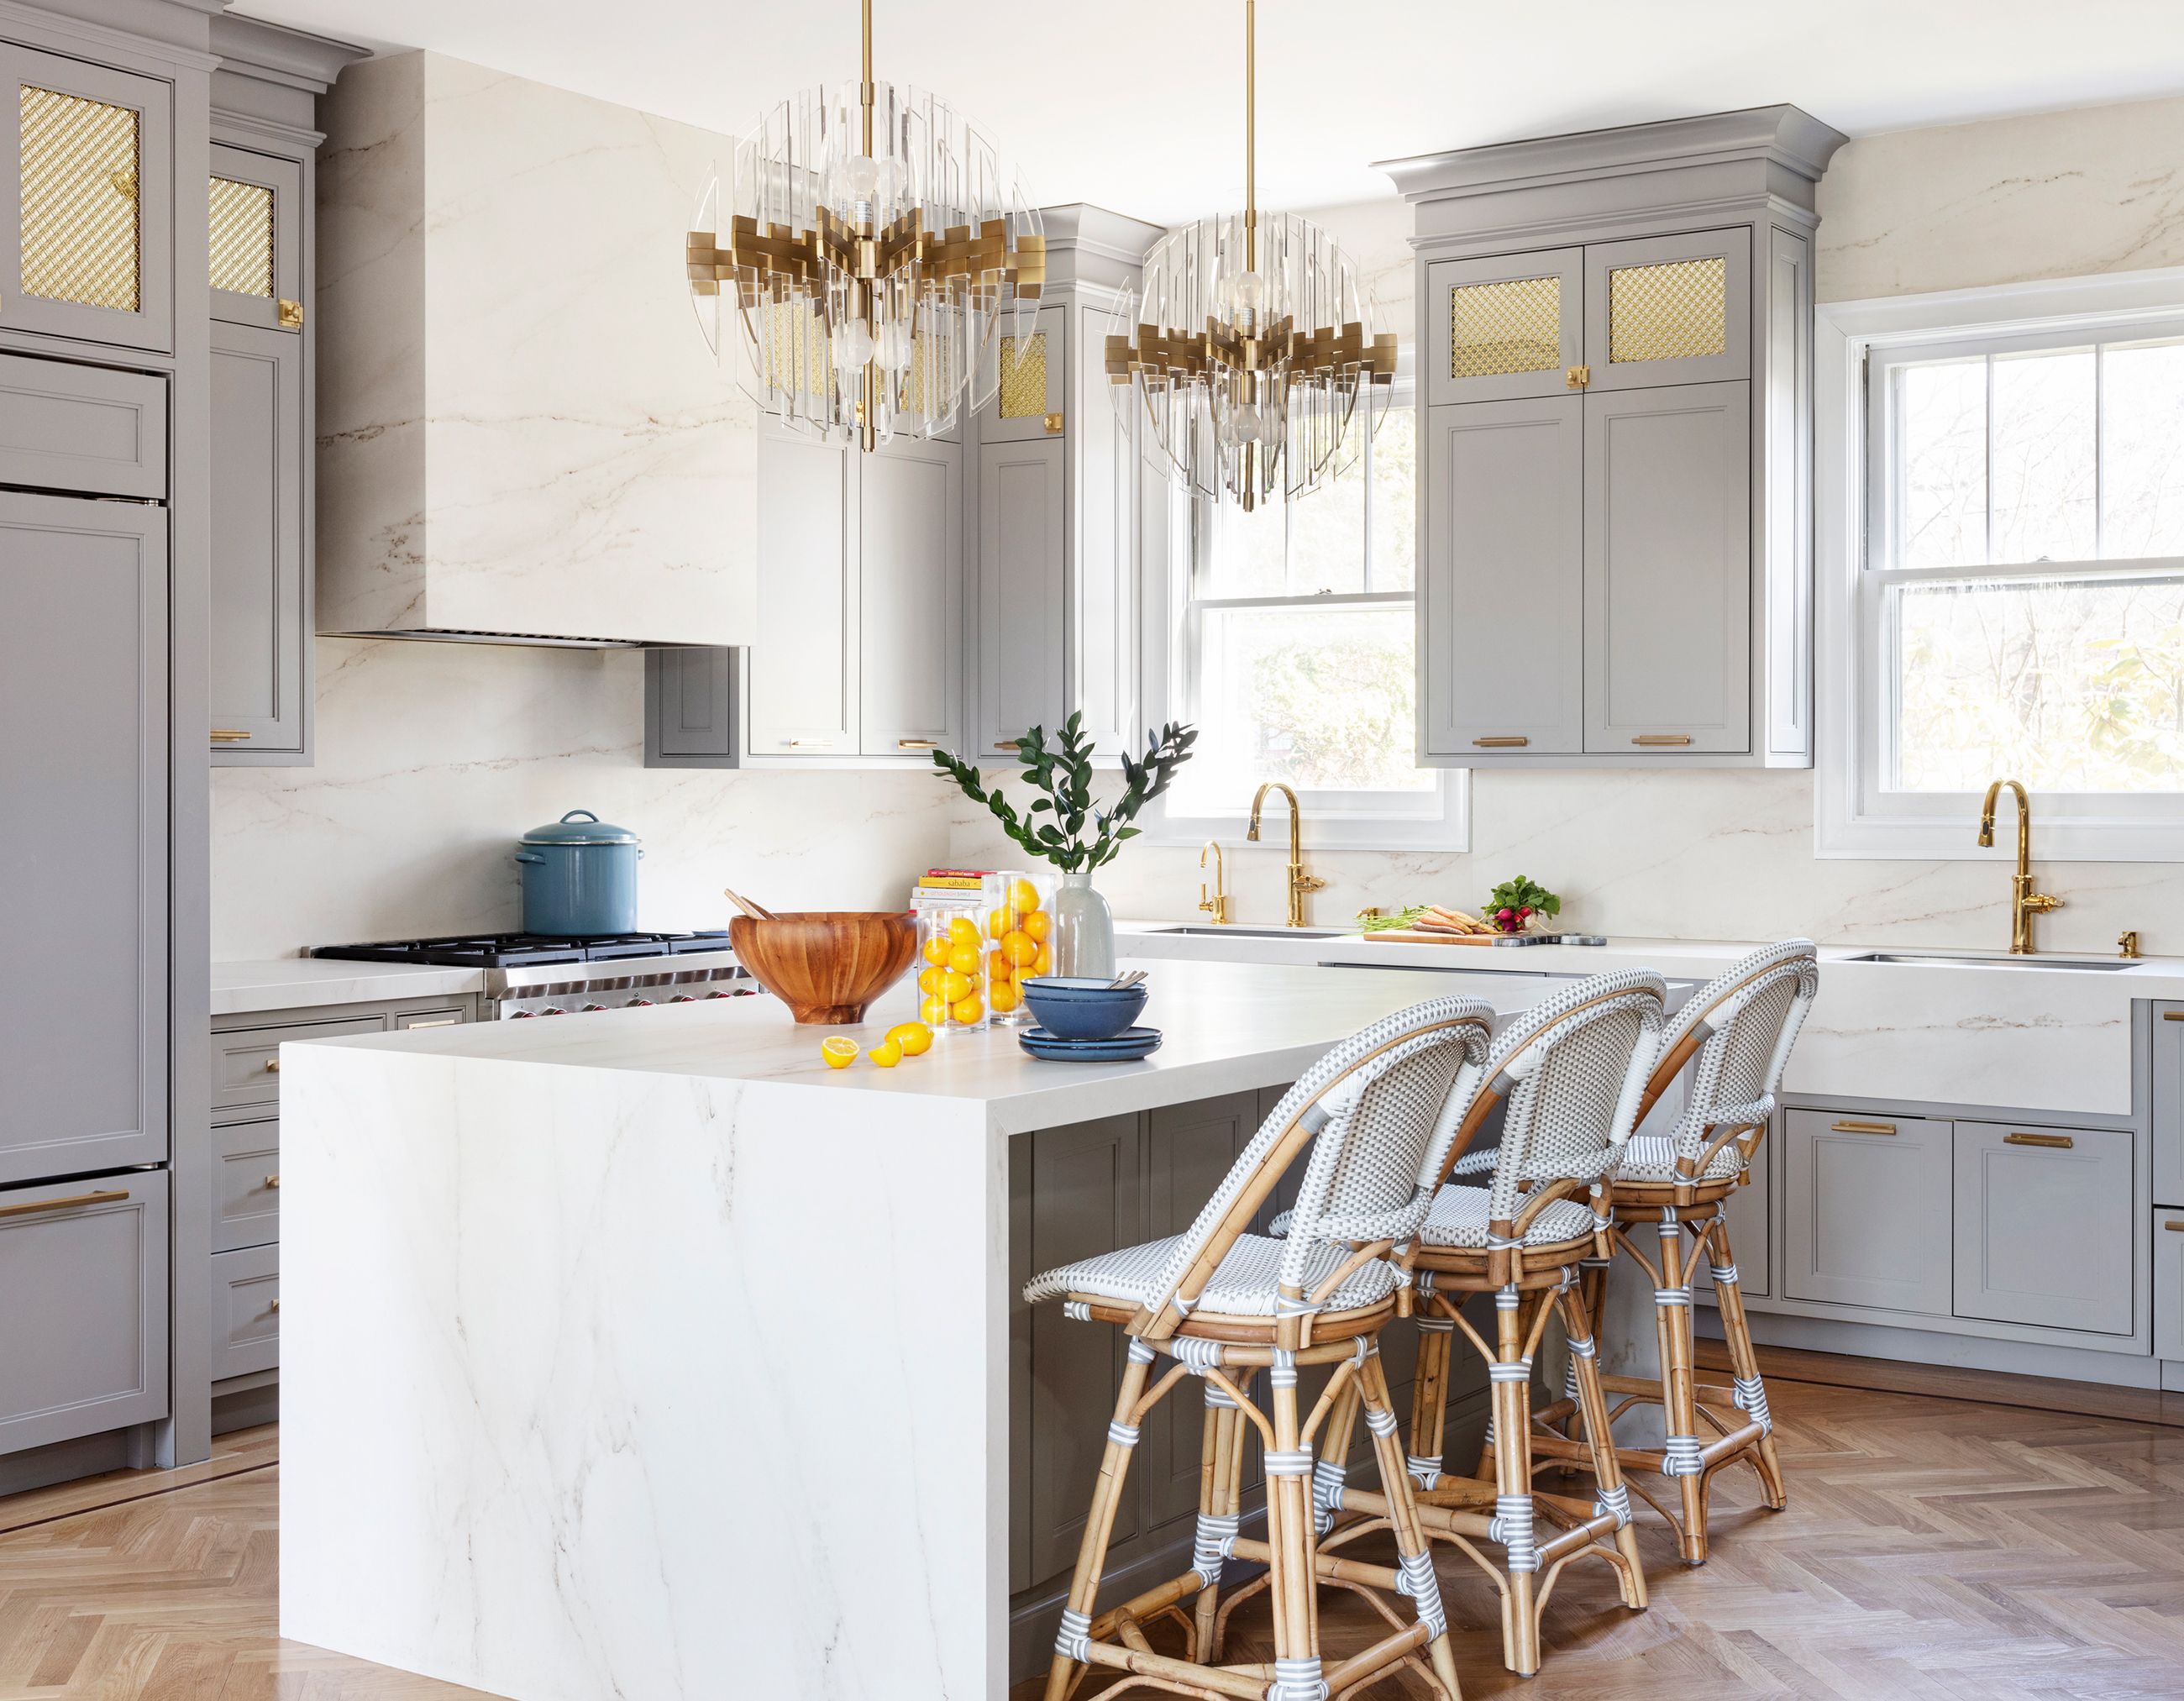 Kitchen Trends 20 New Color, Cabinet and Countertop Ideas